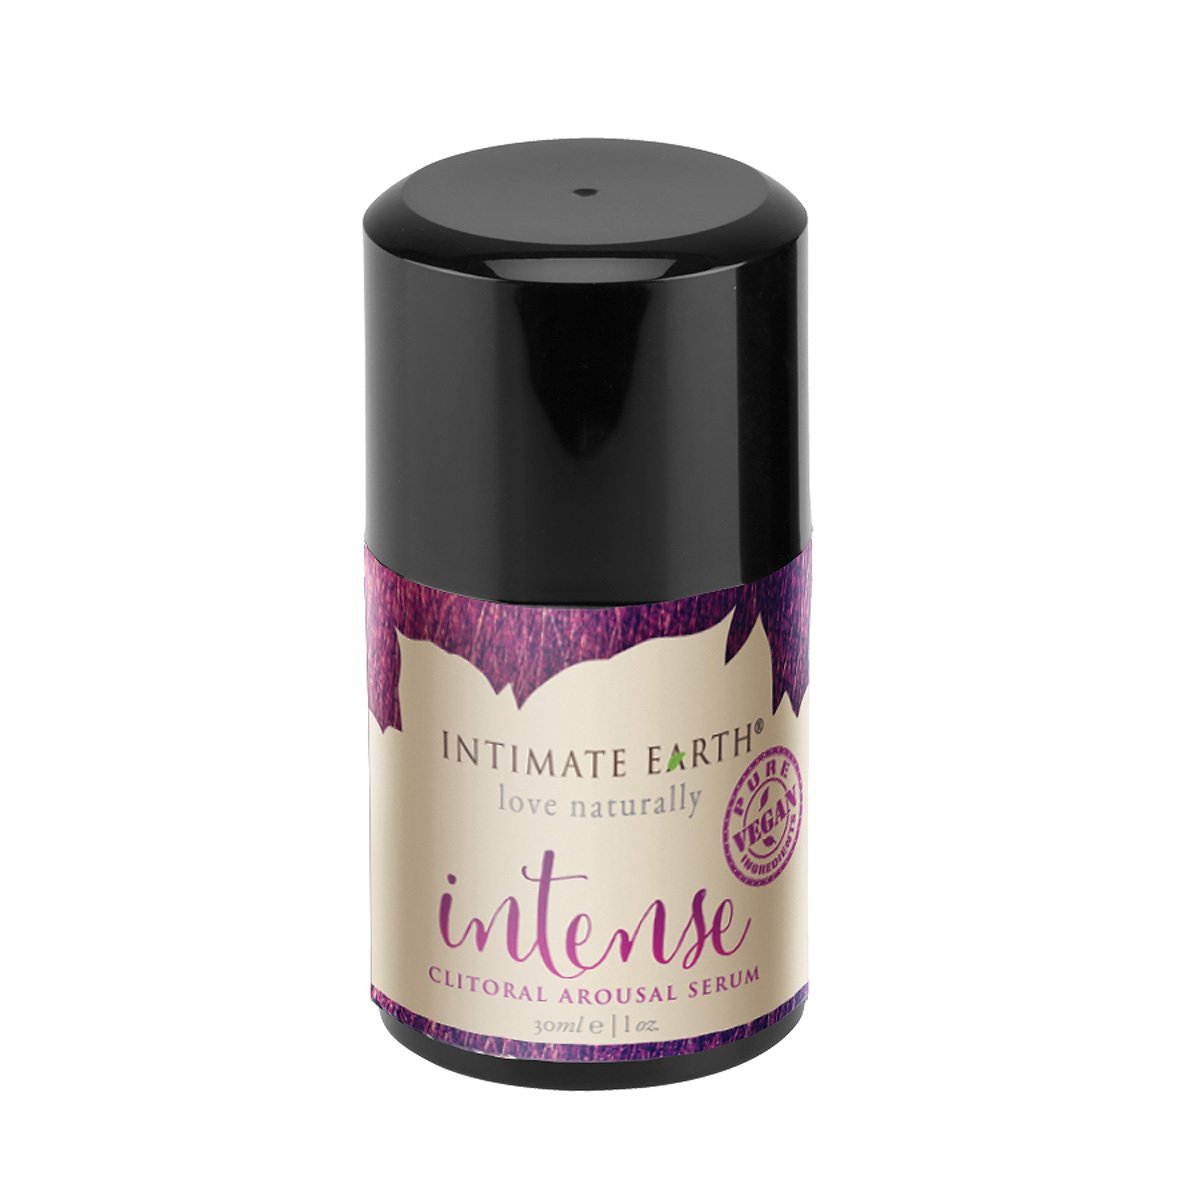 Intimate Earth Intense Clitoral Arousal Serum 1oz - Buy At Luxury Toy X - Free 3-Day Shipping